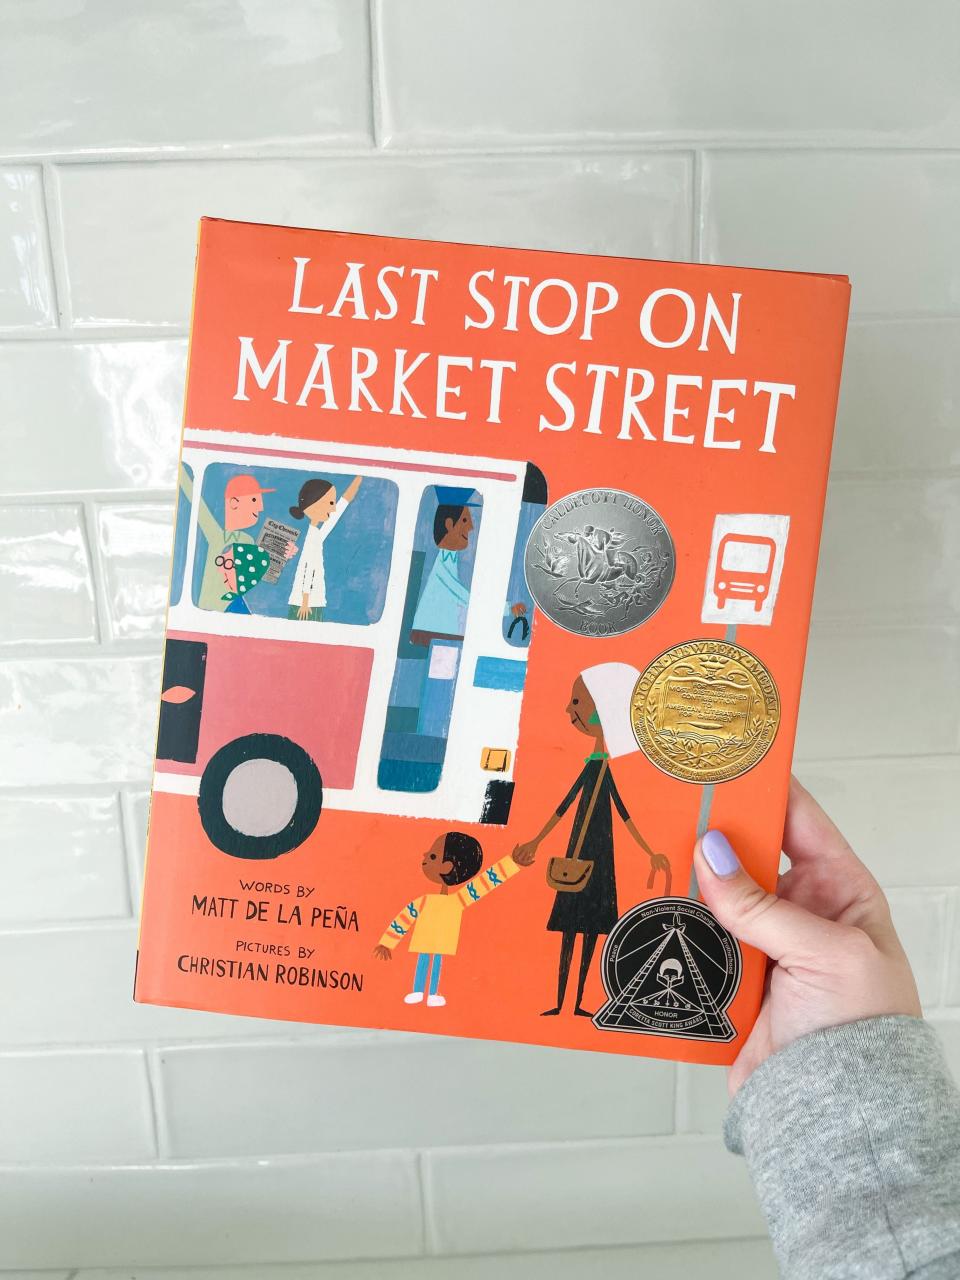 "Last Stop on Market Street" will be the 2022 Little Read Lakeshore featured book.